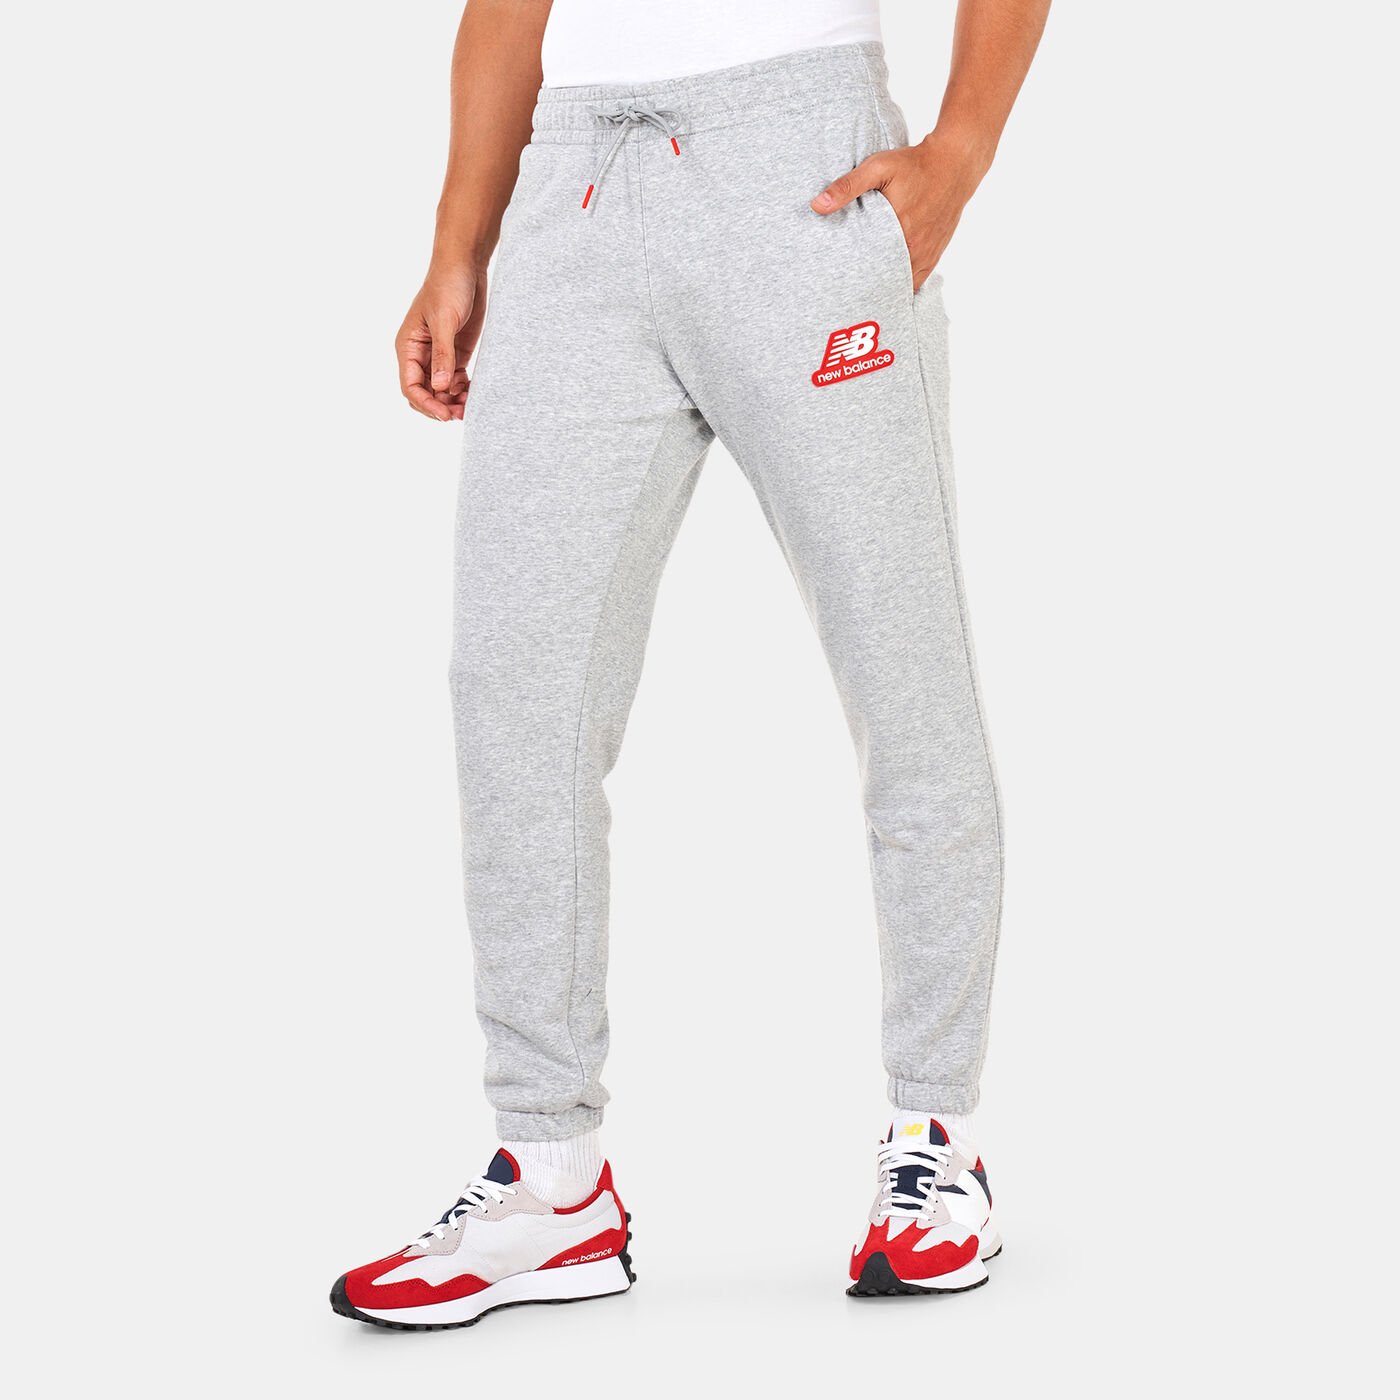 Men's NB Essentials Stacked Rubber Pack Sweatpants